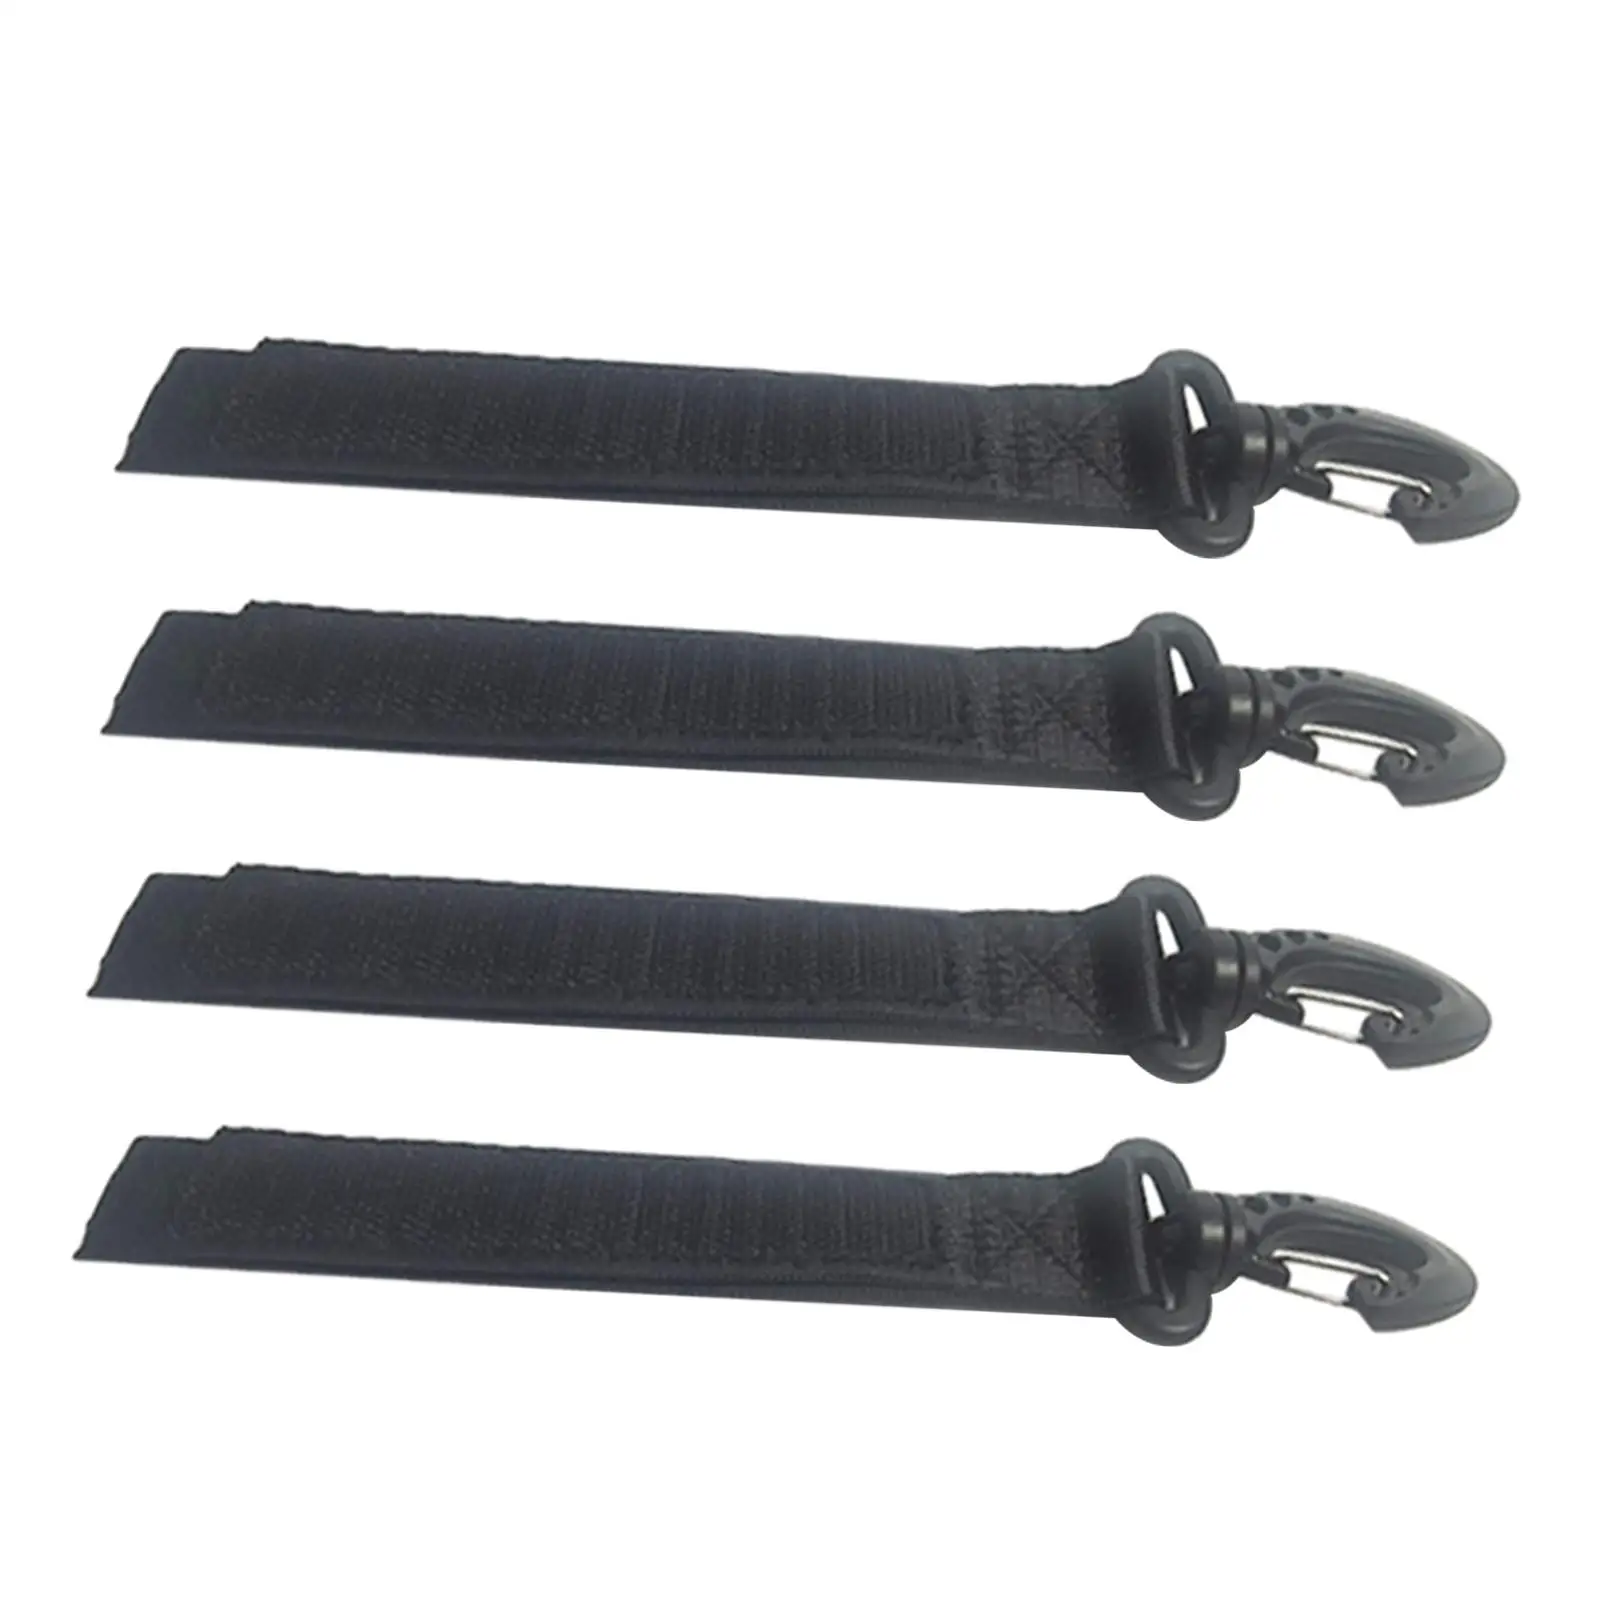 4x Kayak Paddle Holder Strap Fixed Buckle Durable Fishing Rod Paddleboard Storage for Watercraft Dinghy Surfboard House Rowing